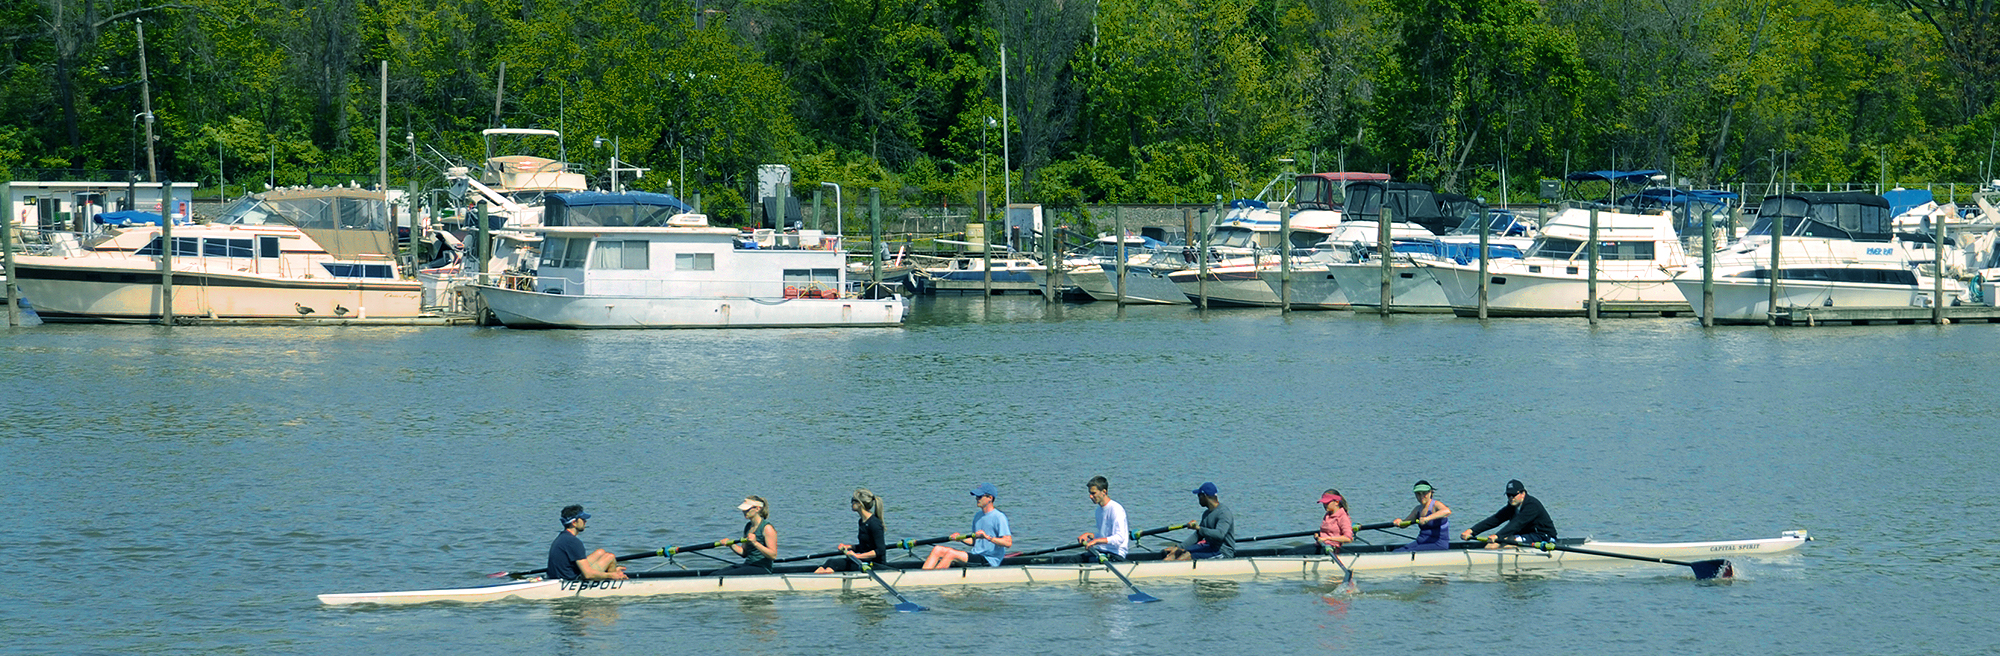 An image of the river with a dock and boats in the background. A long, rowing boat filled rowers in the foreground.